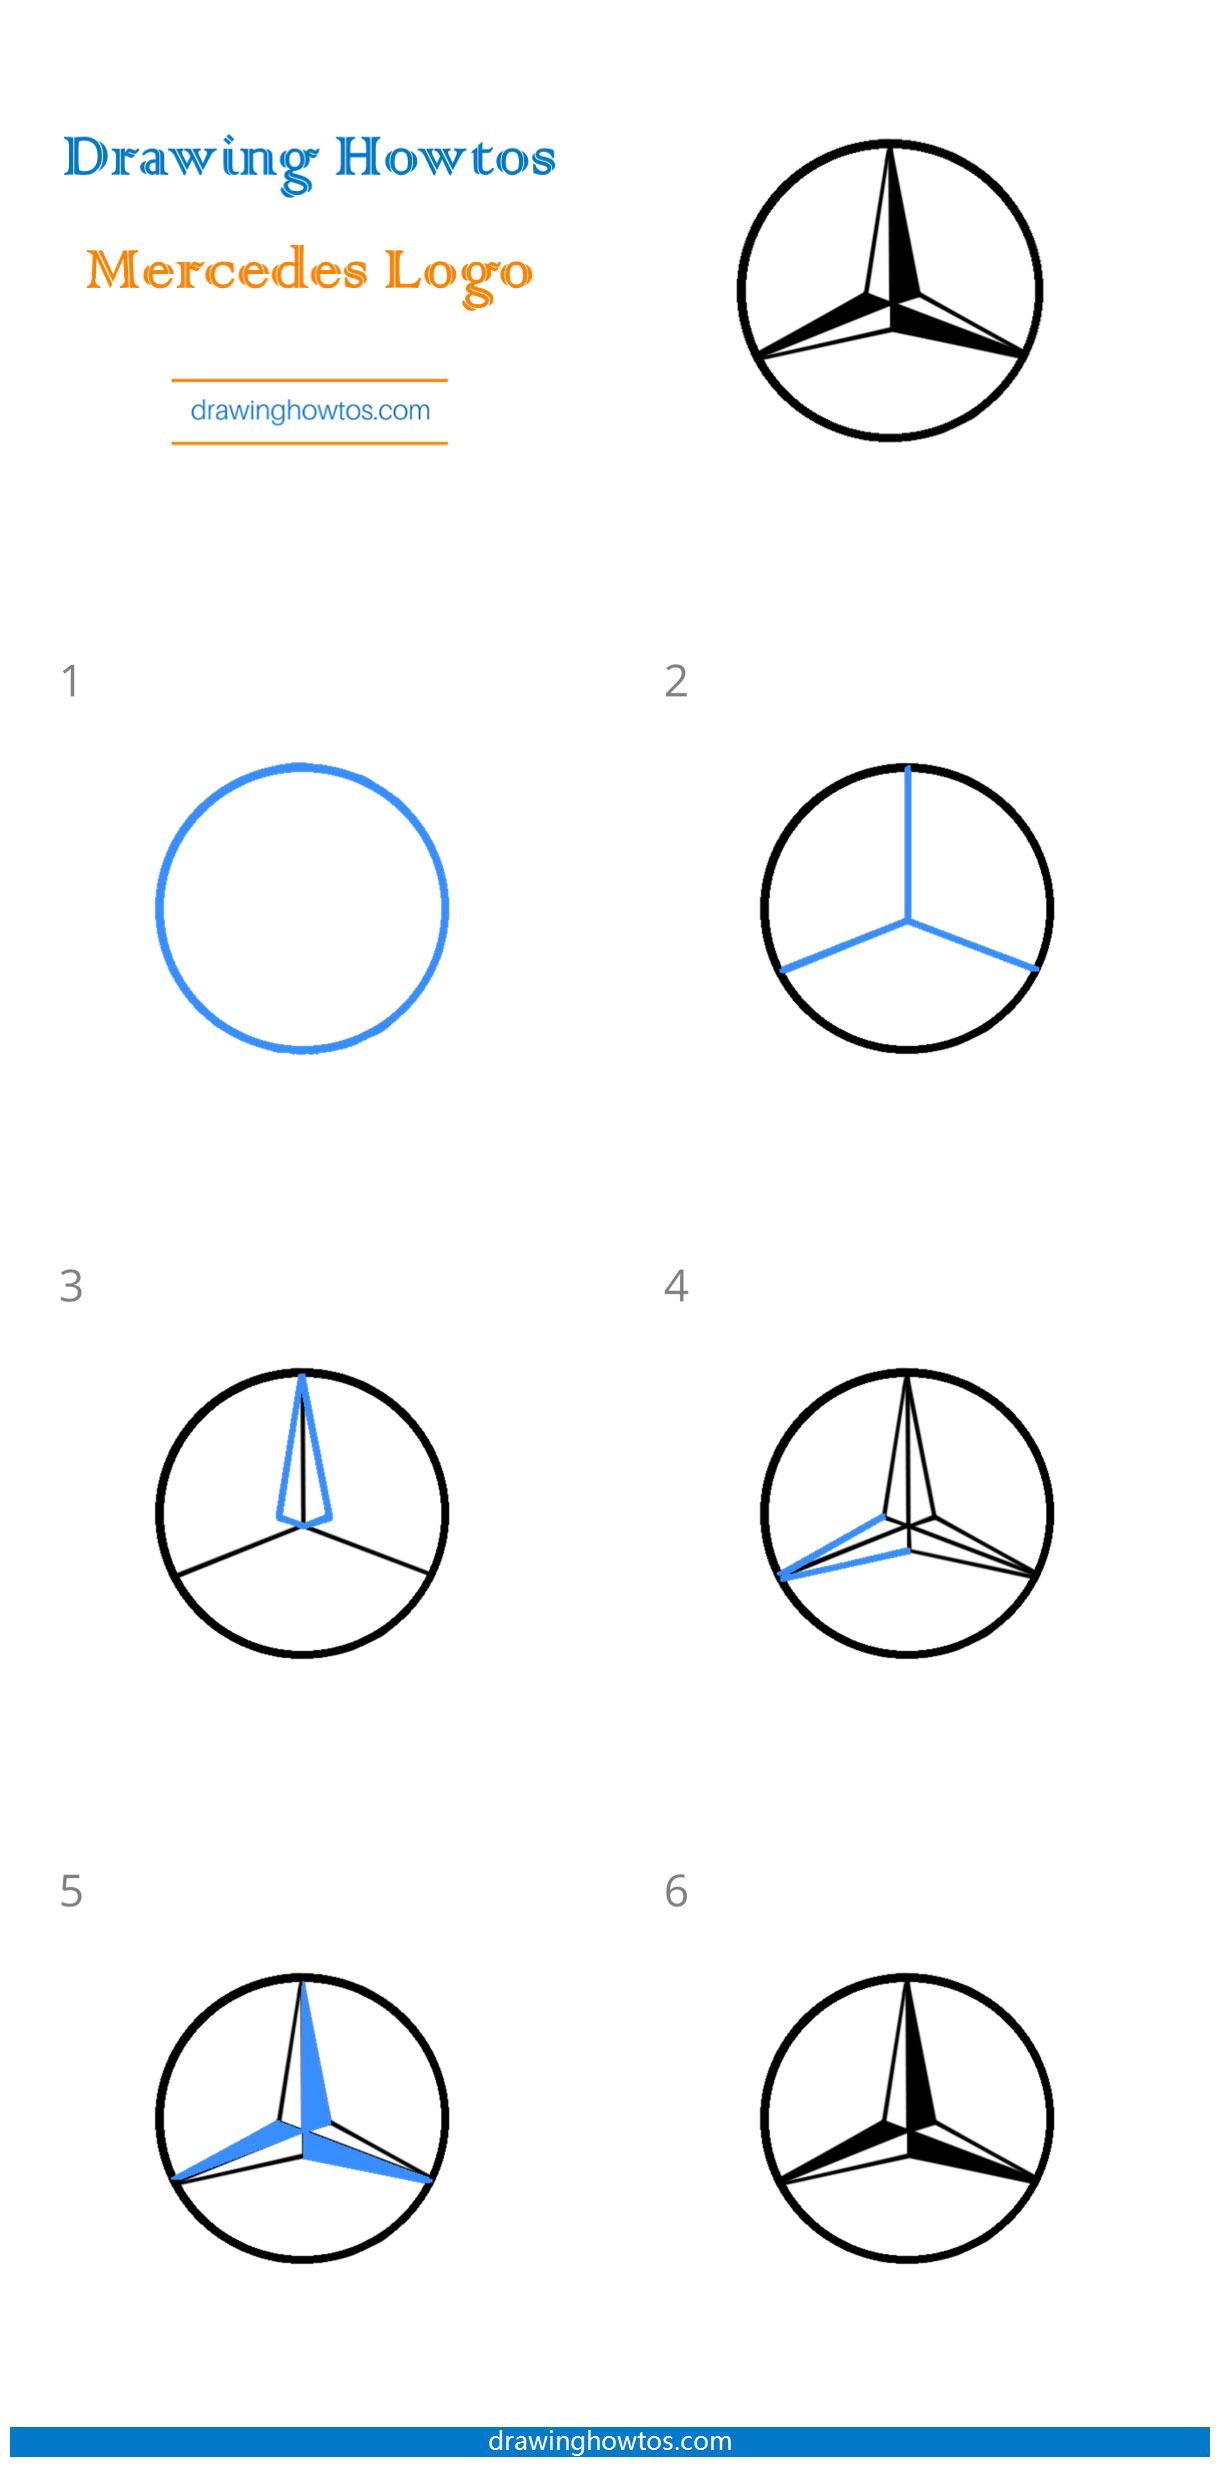 How to Draw a Mercedes Logo Step by Step